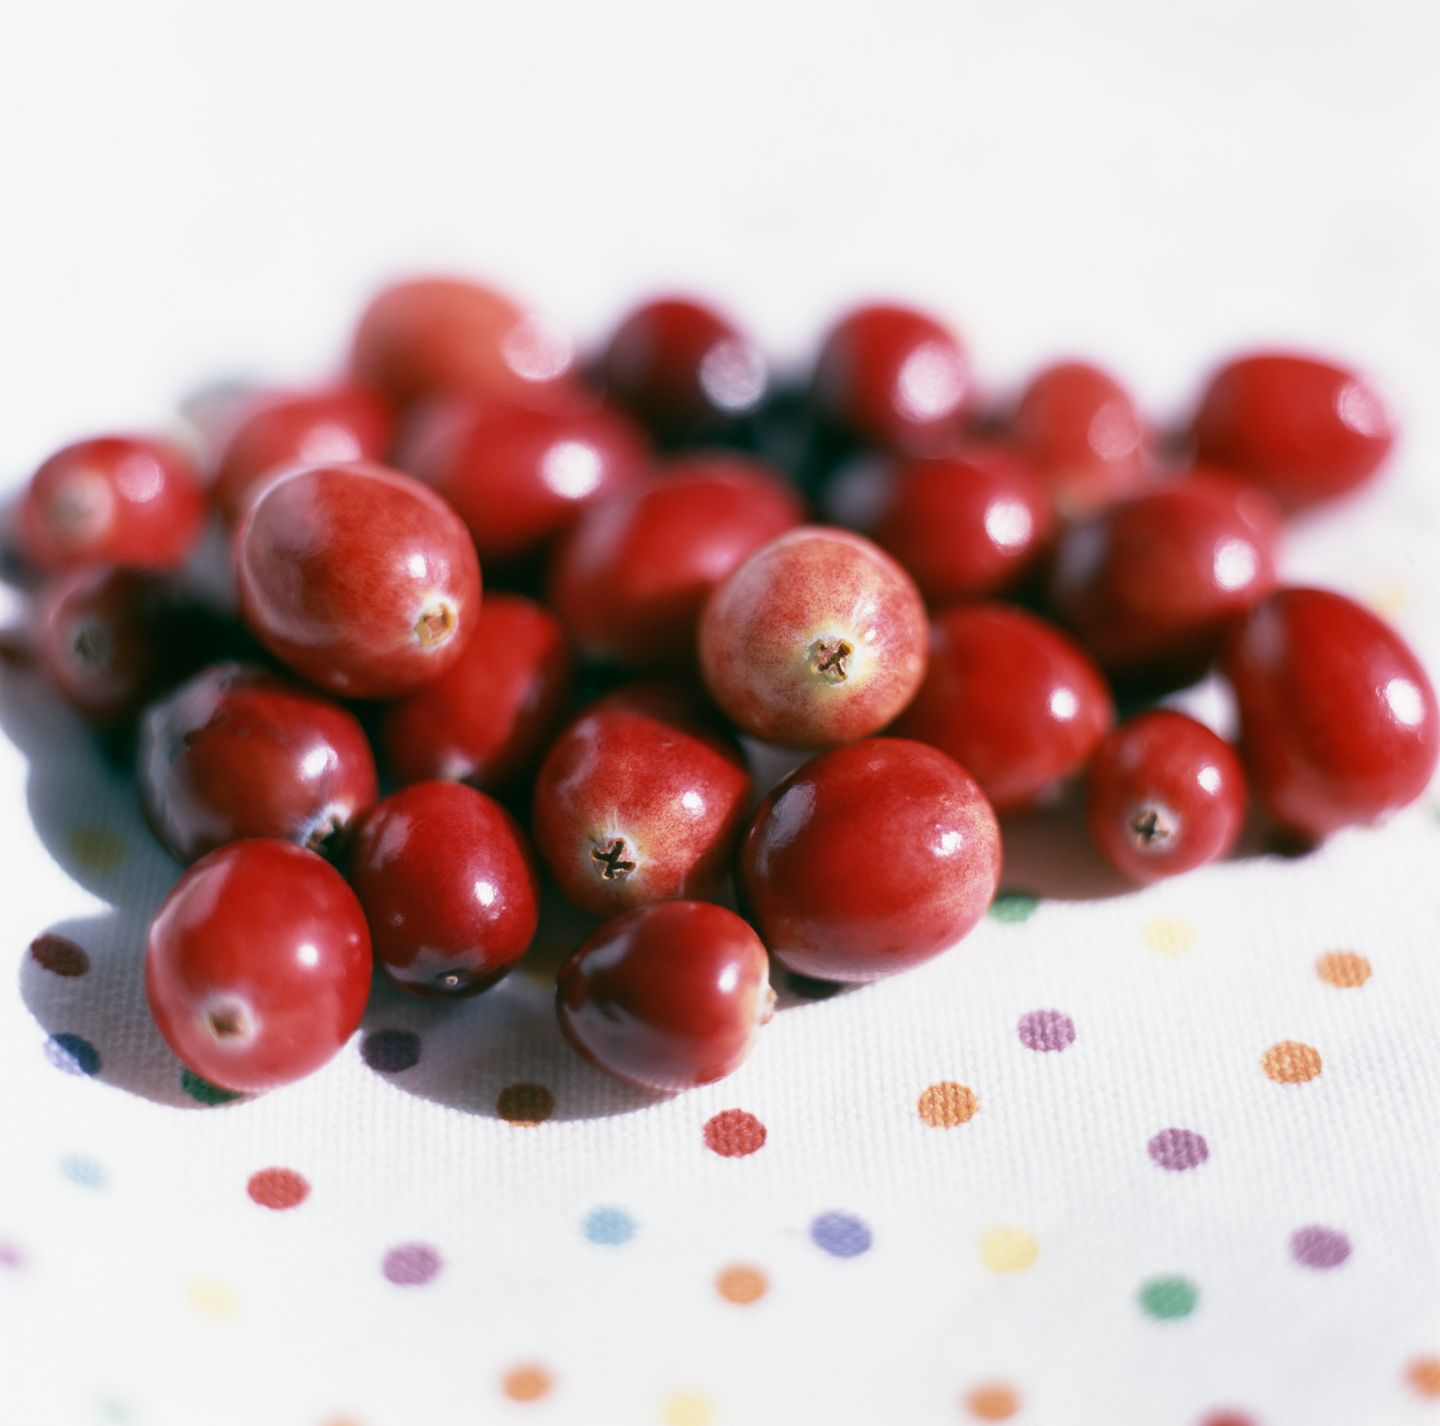 Whole fresh red cranberries